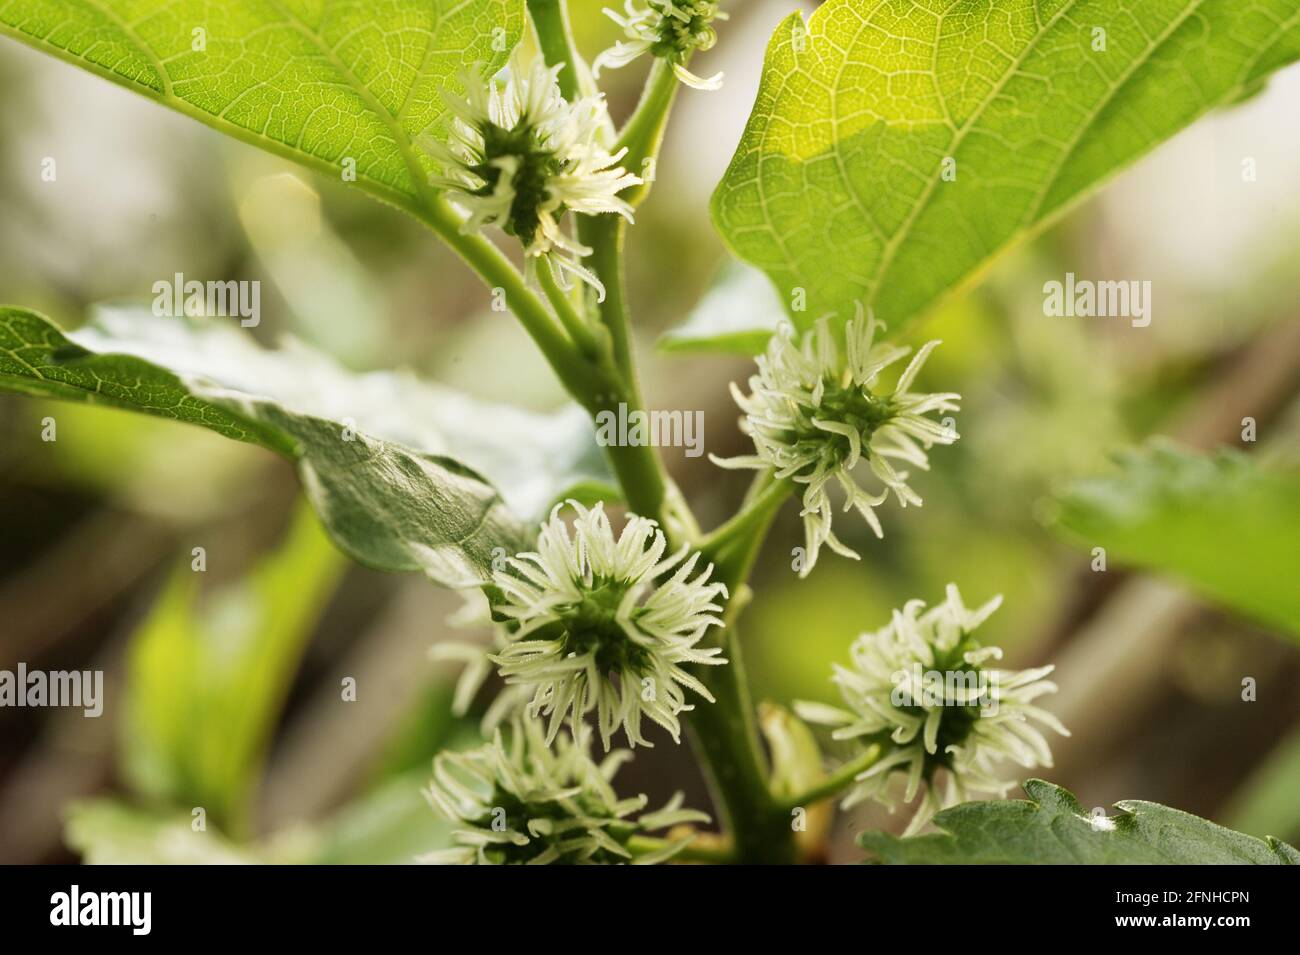 young green mulberry fruit on the tree Stock Photo